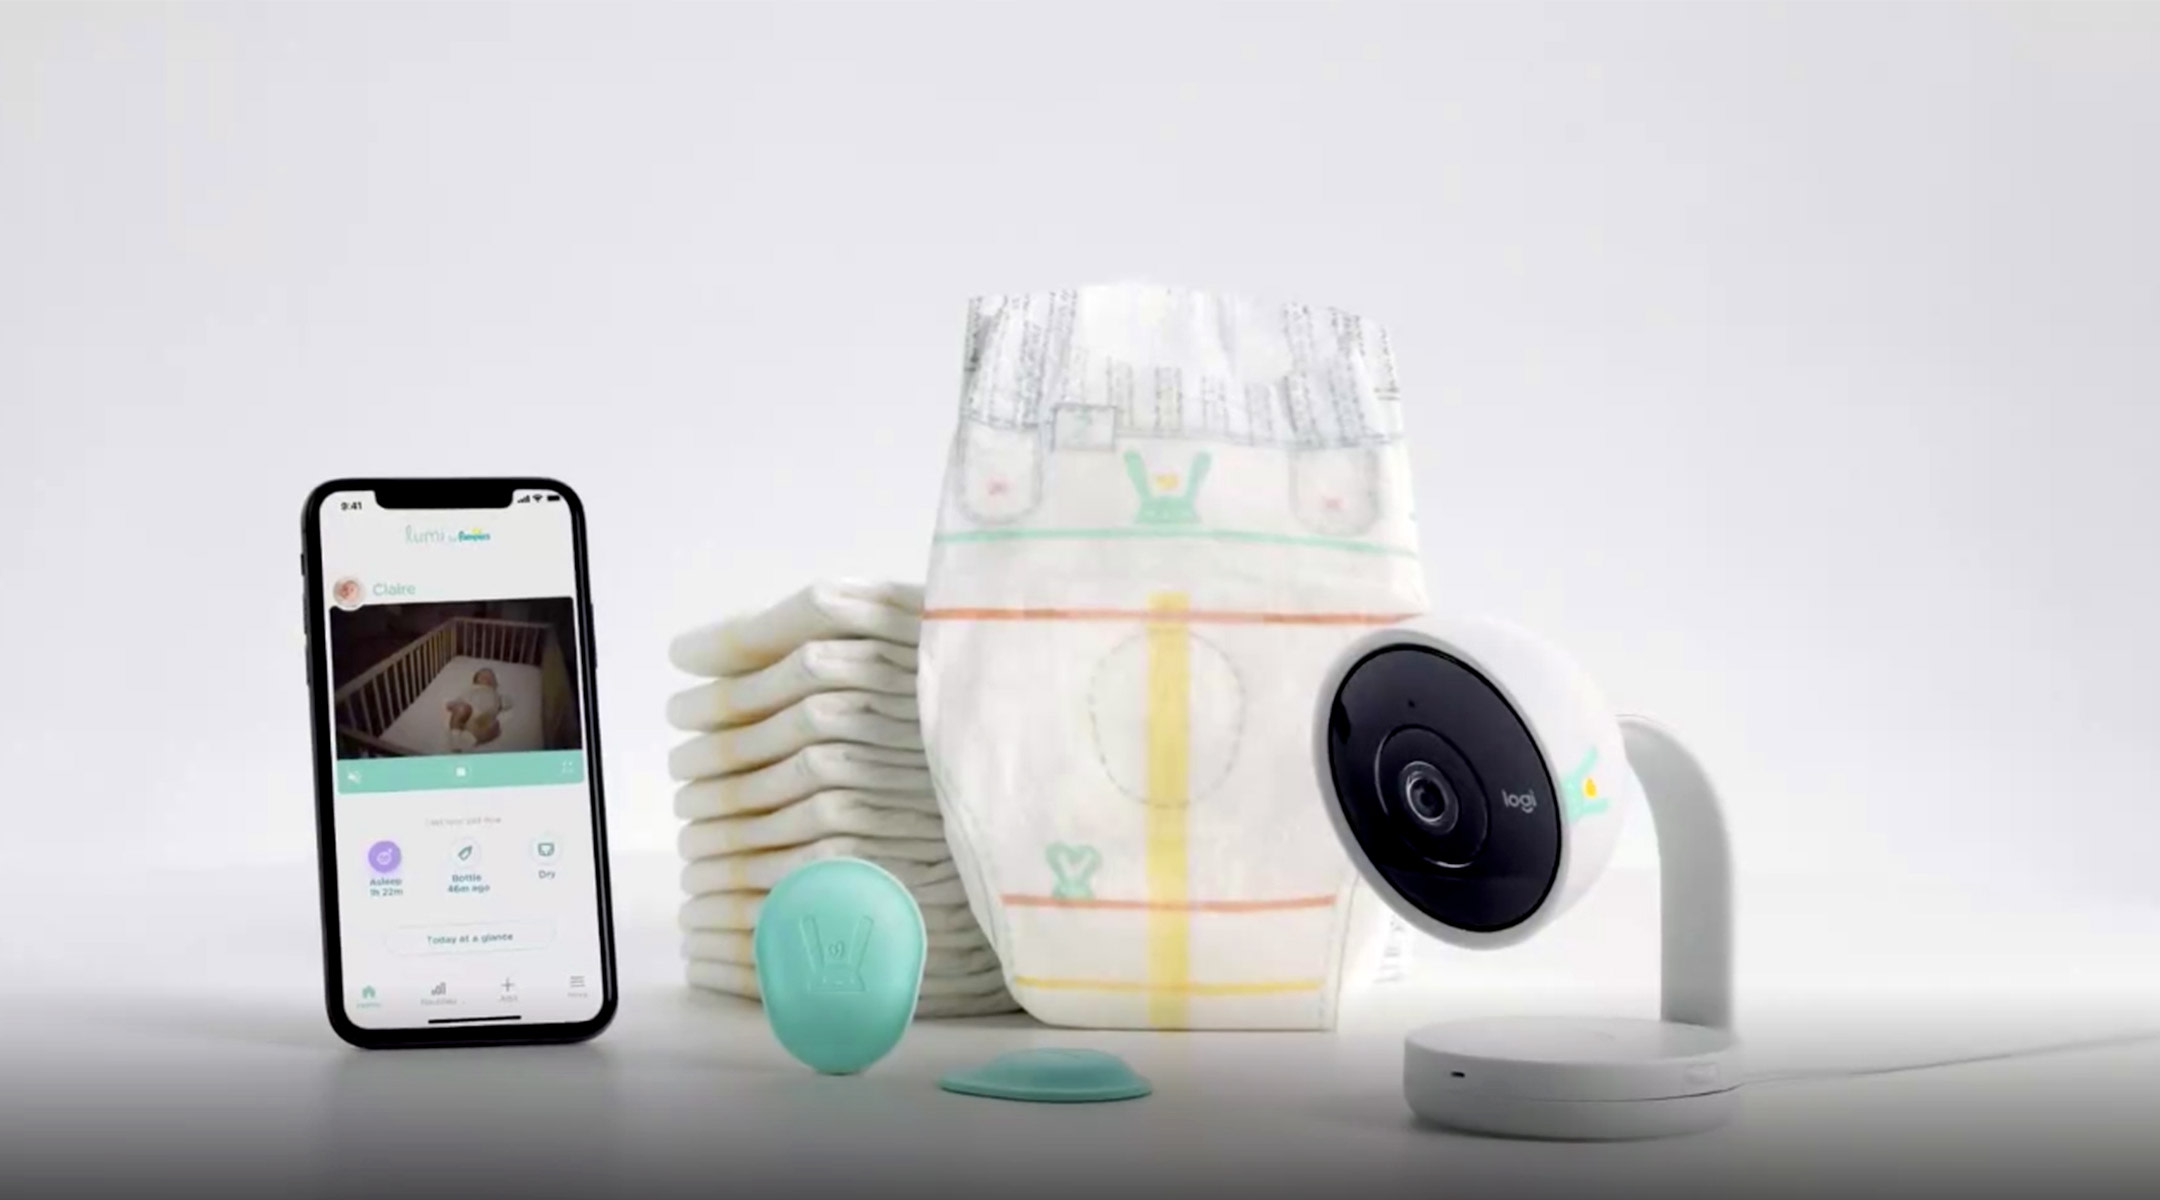 pampers launches smart diaper along with lumi